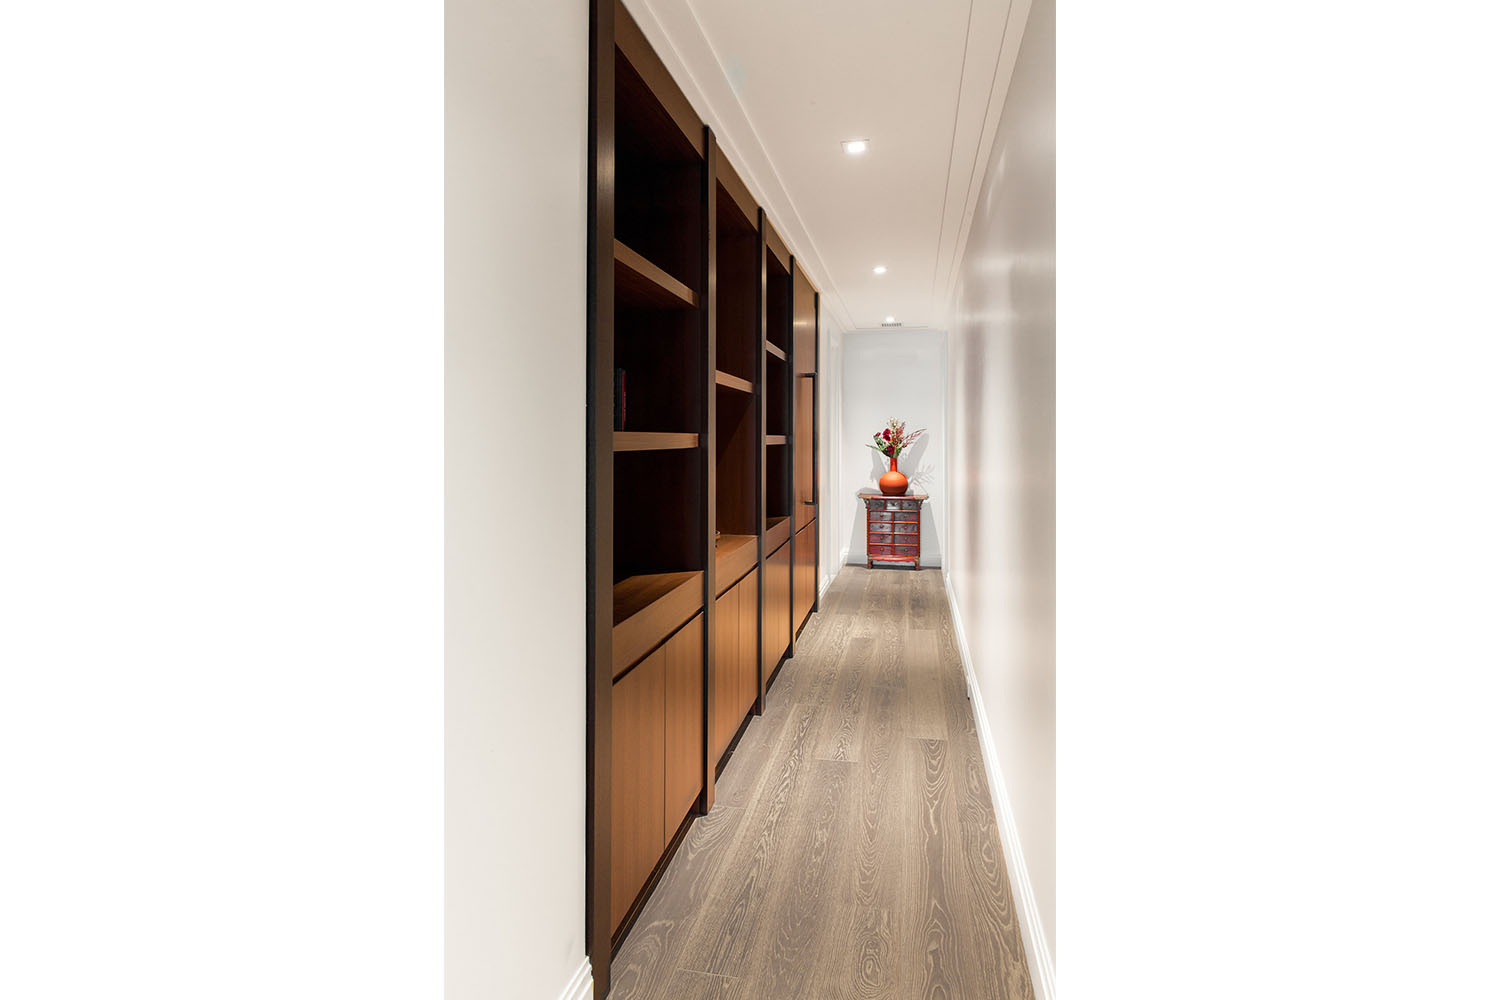 Luxury Residential Home Construction - Drake Tower Chicago hallway with built-in shelving